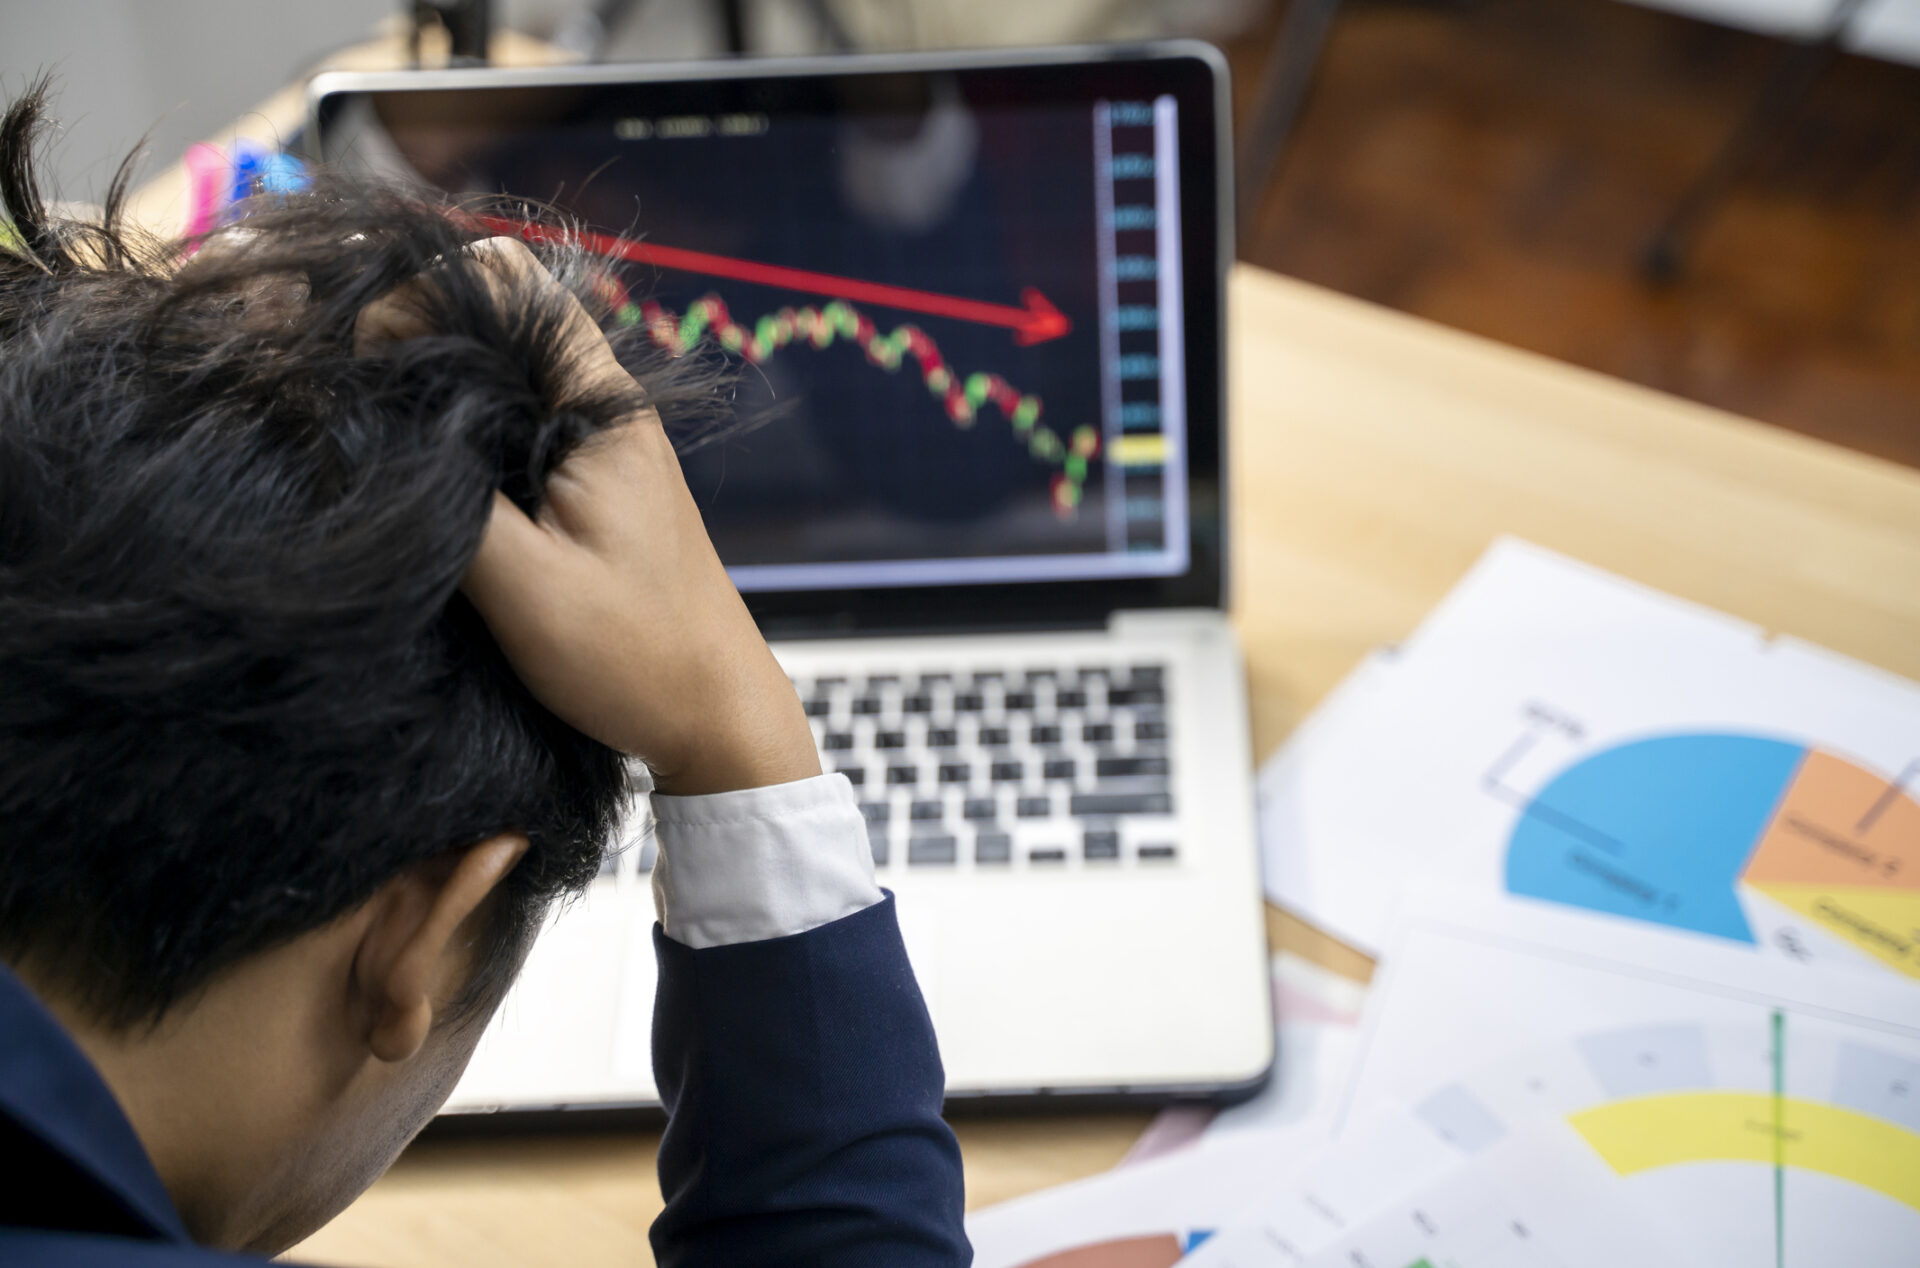 Stock trader tearing out his hair from despair after making common investment mistakes